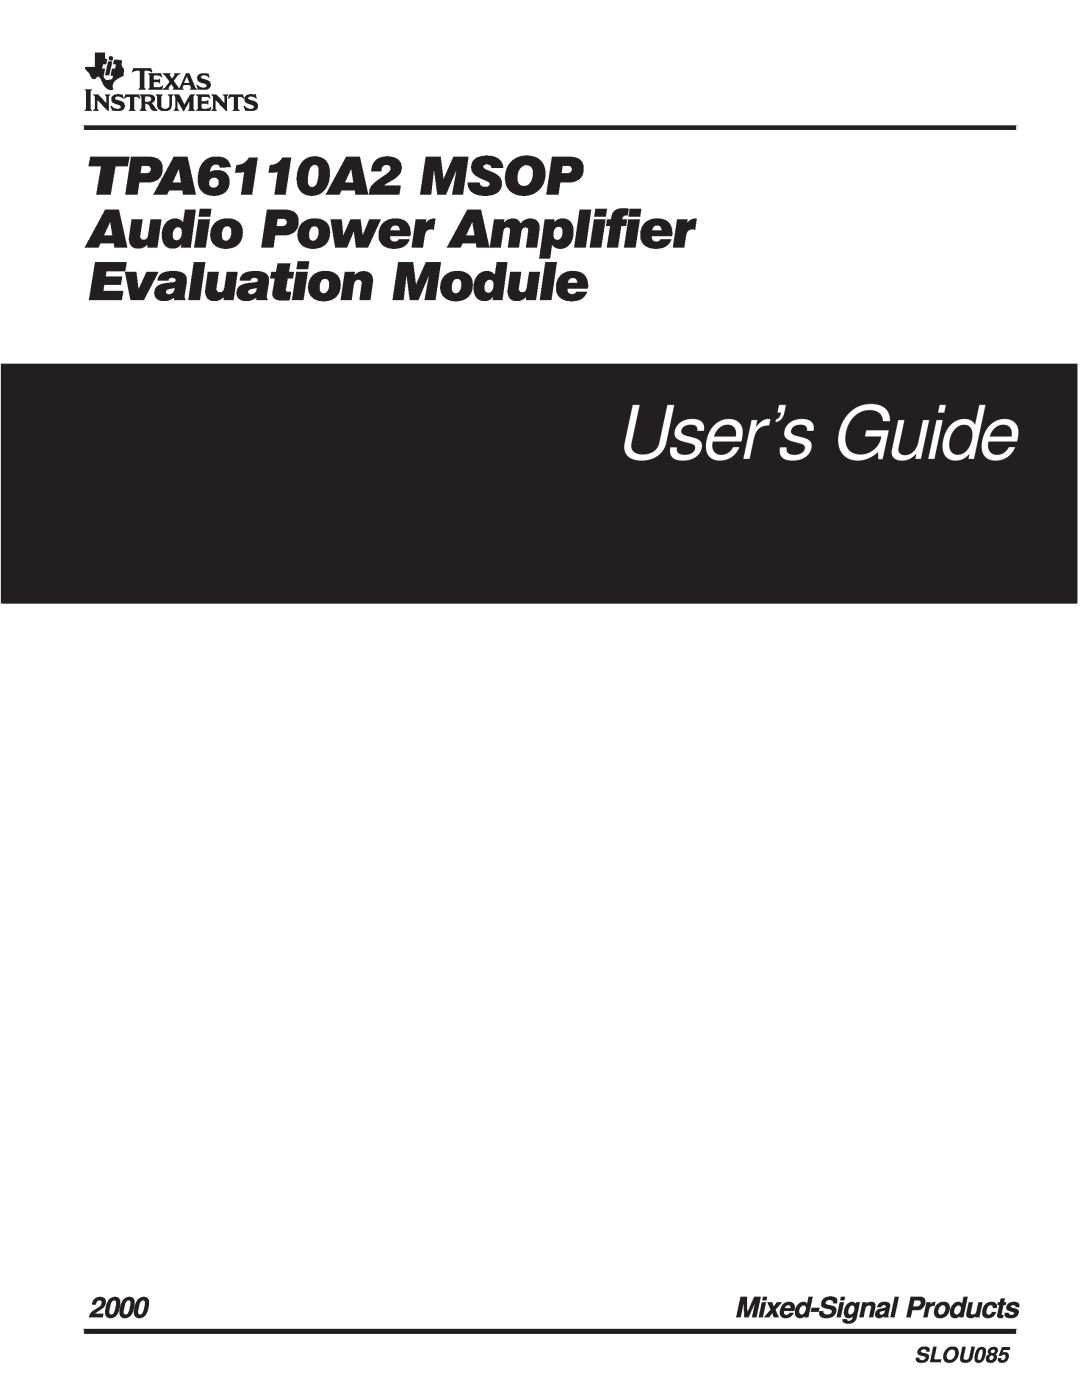 Texas Instruments TPA6110A2 MSOP manual Users Guide, P OP P aa, 2000, Mixed-SignalProducts, SLOU085 